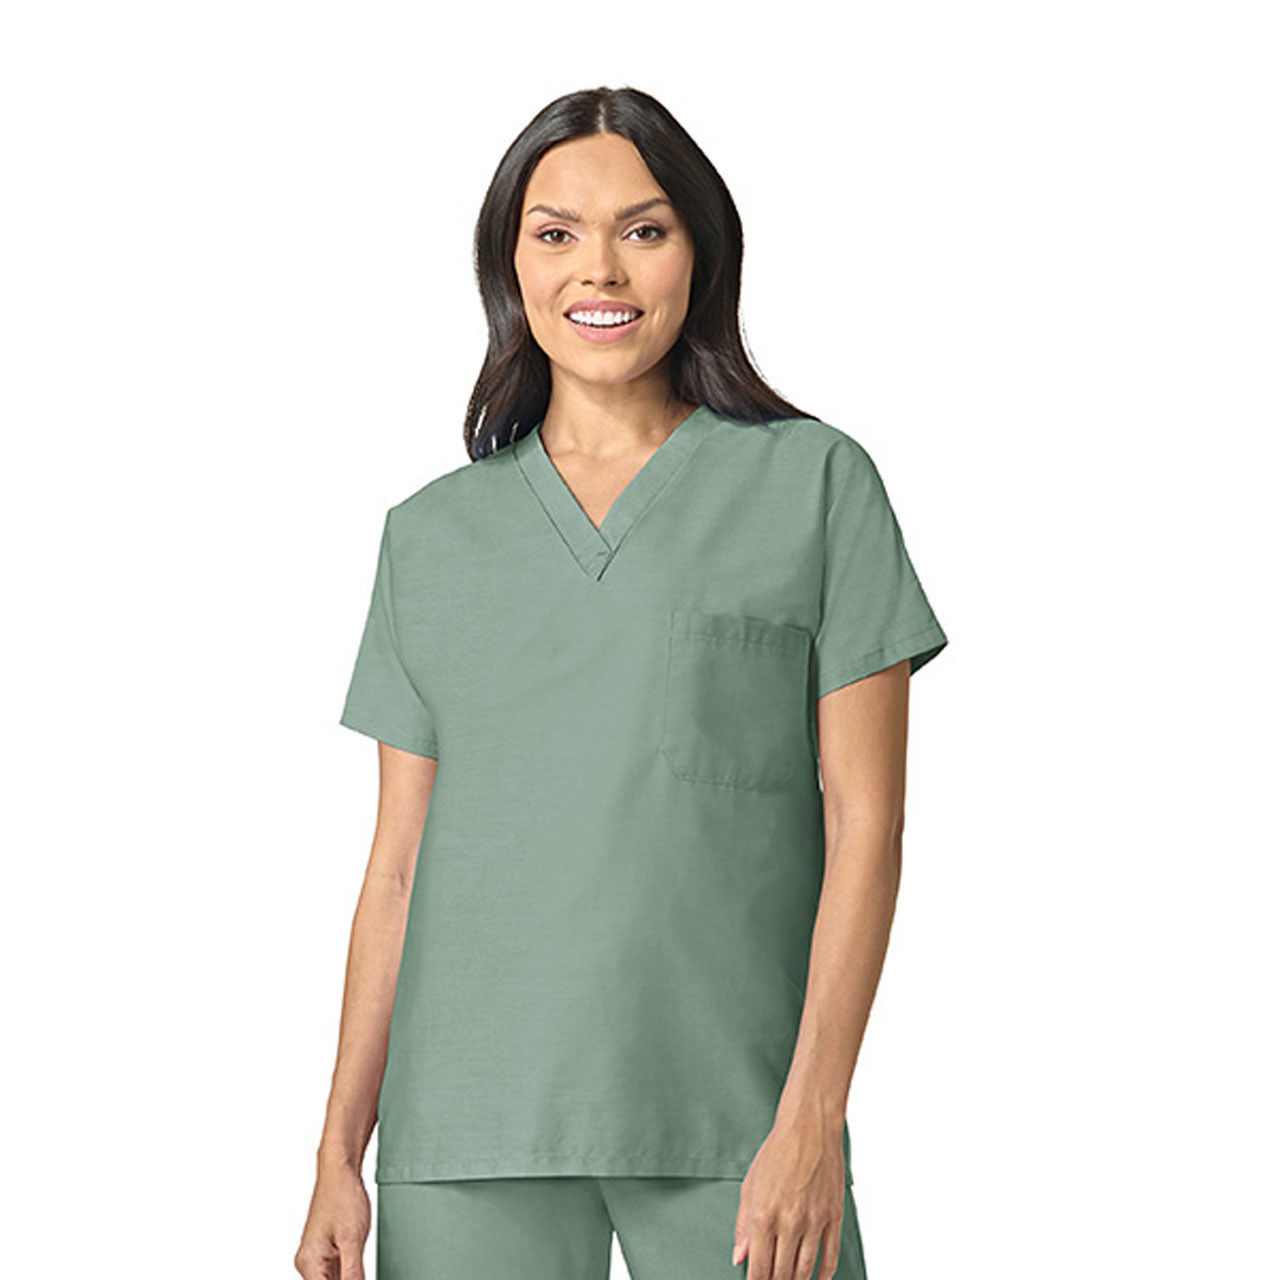 Is there one sage green scrubs top in each bag?